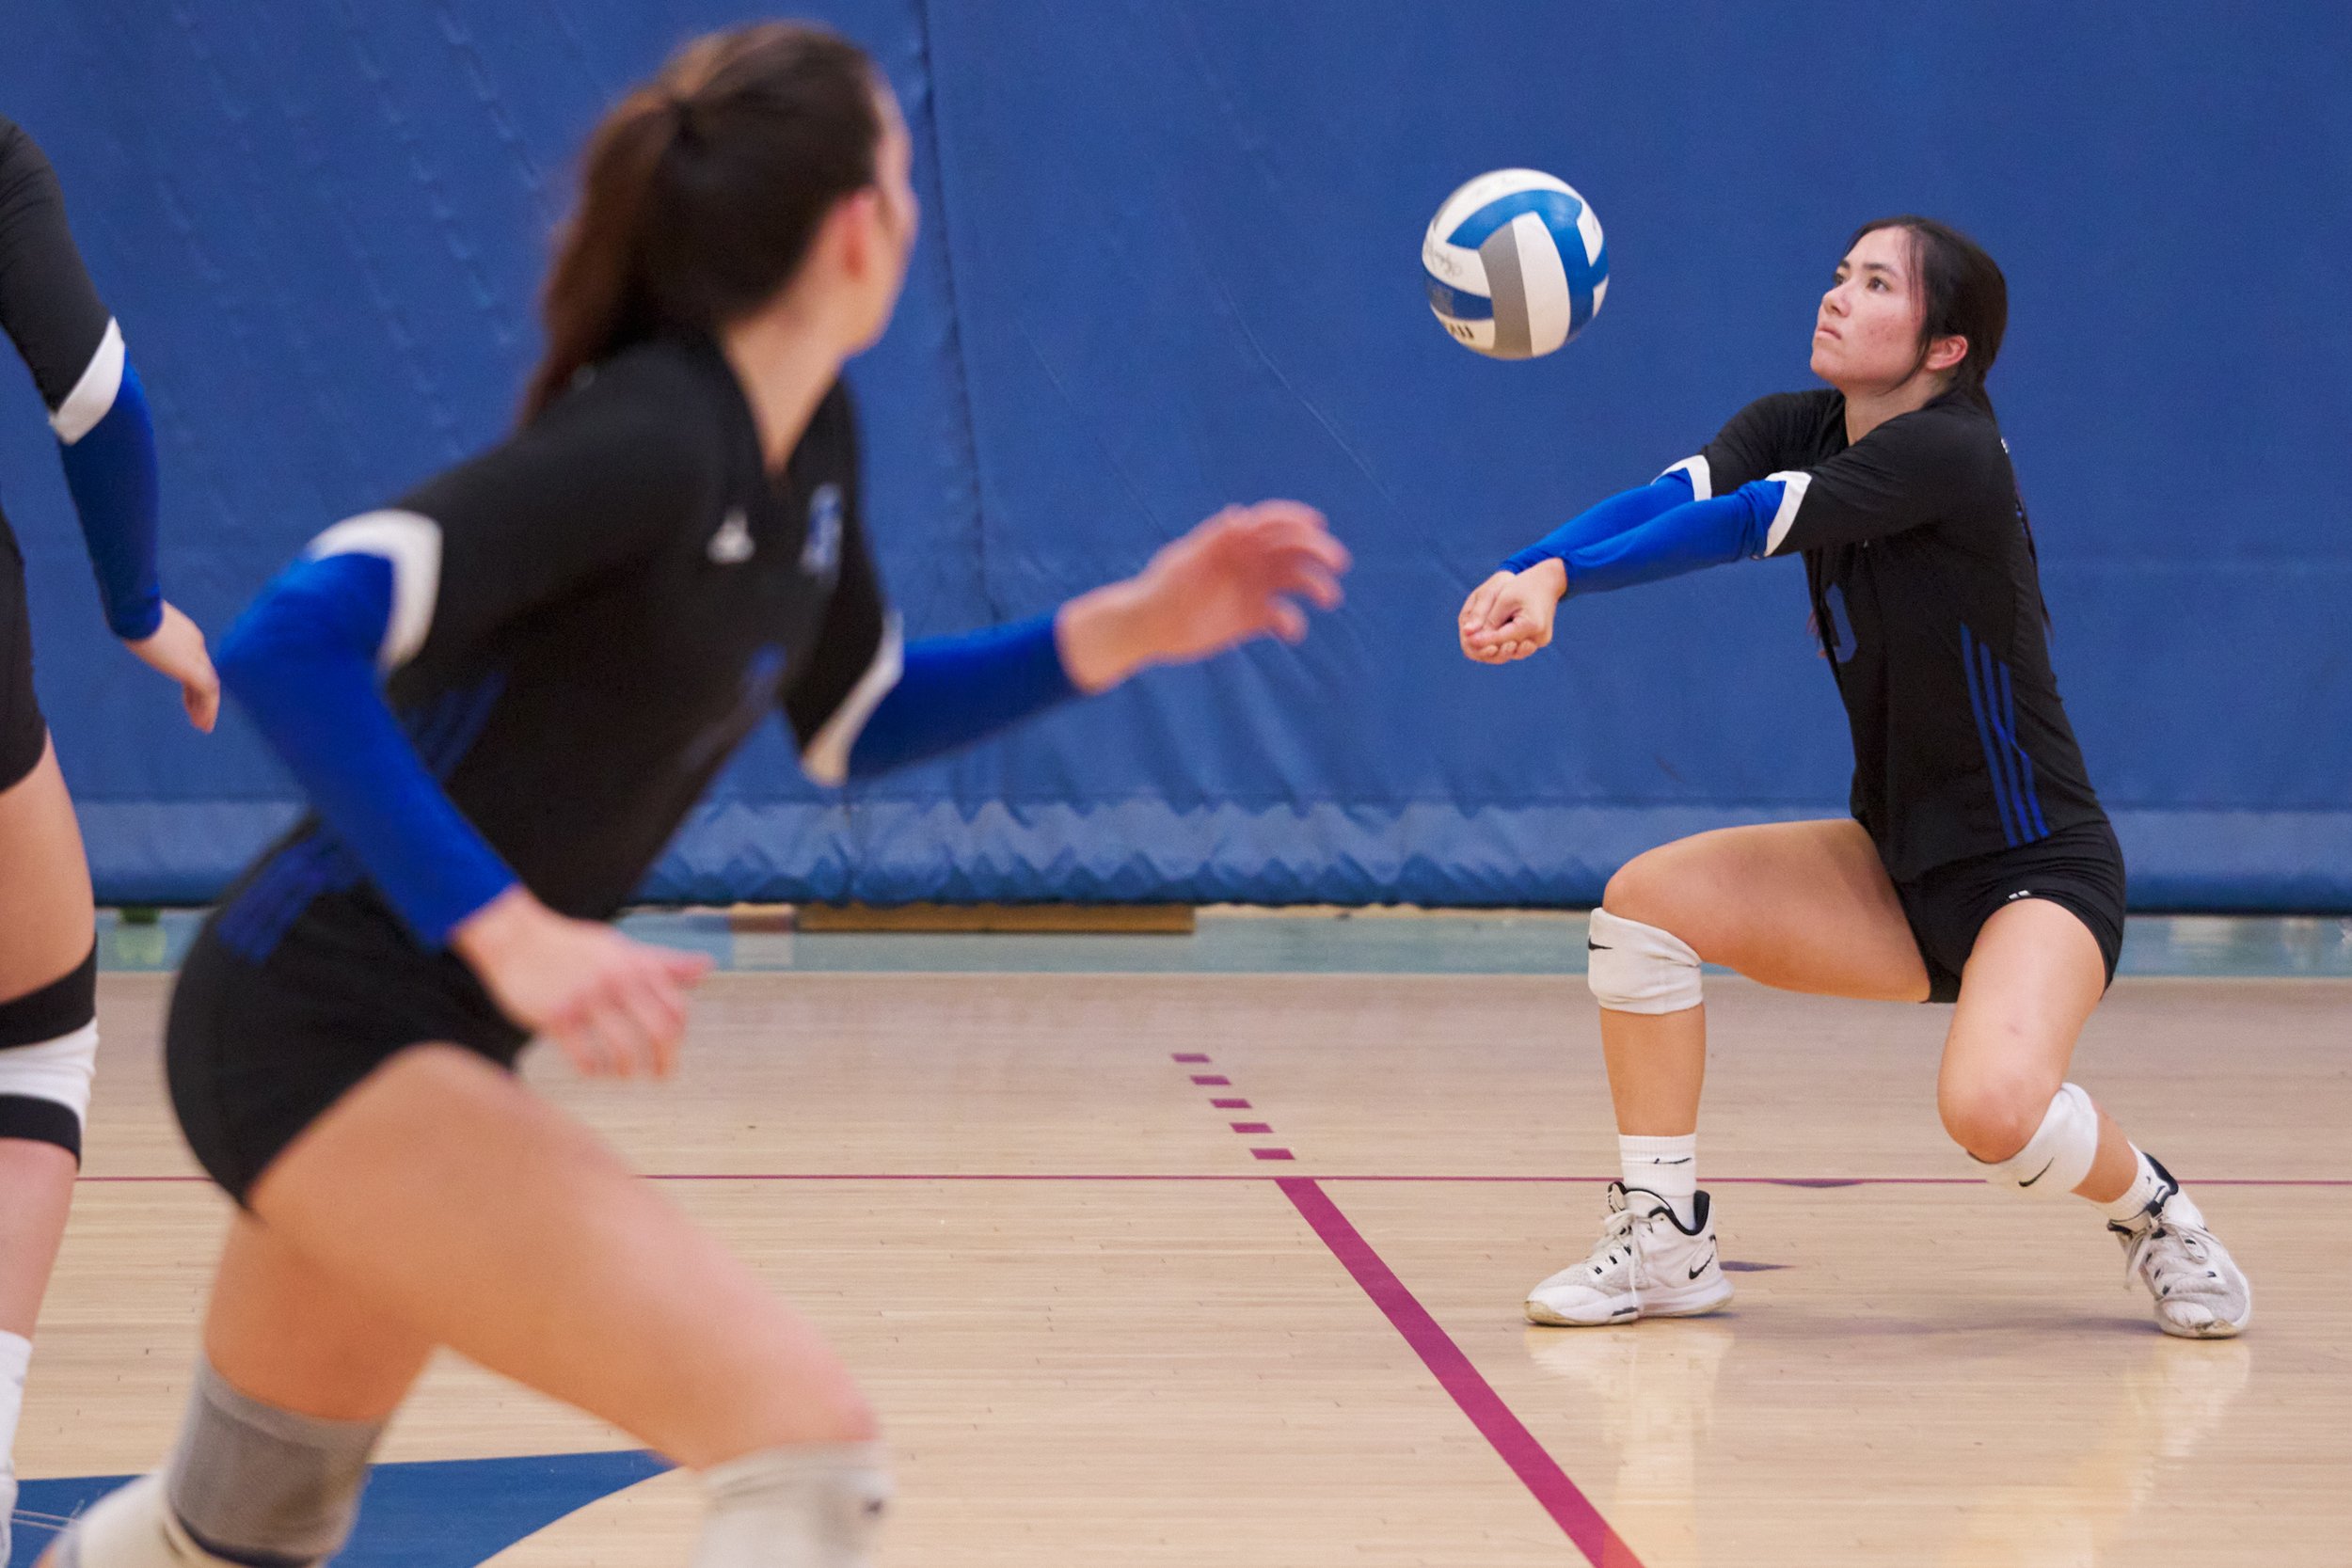  Santa Monica College Corsairs' Sophia Odle (right) bumps the ball during the women's volleyball match against the Cuyamaca College Coyotes on Wednesday, Sept. 6, 2023, at the SMC Gym in Santa Monica, Calif. The Corsairs won 3-0. (Nicholas McCall | T